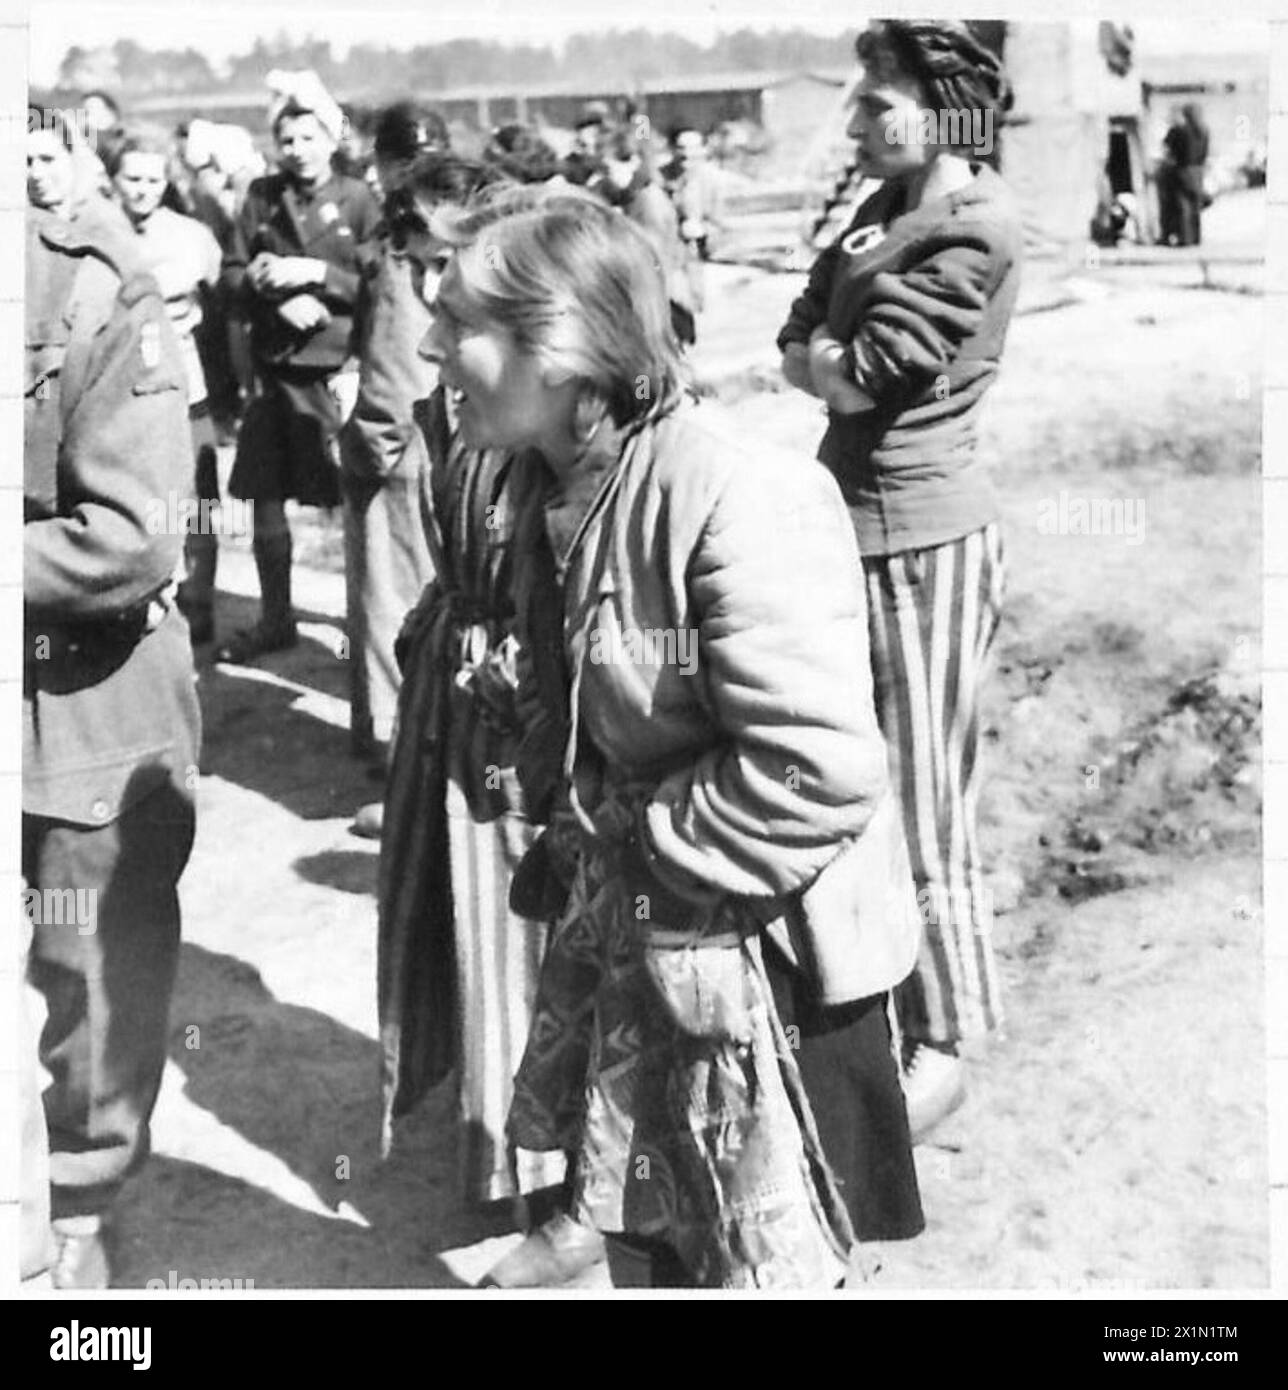 THE LIBERATION OF BERGEN-BELSEN CONCENTRATION CAMP, APRIL 1945 - Hela was born in a Jewish family in Tuszyn in central Poland which meant four years in concentration camps.She was in Łódź (Litzmannstadt) Ghetto, Auschwitz and Bergen-Belsen camps (in Belsen only for two weeks before British troops arrived). Hela Goldstein, a Polish inmate, and other female prisoners watching SS guards who dropped with exhaustion while loading lorries with bodies of dead inmates, 21 April 1945, Goldstein, Helena Stock Photo